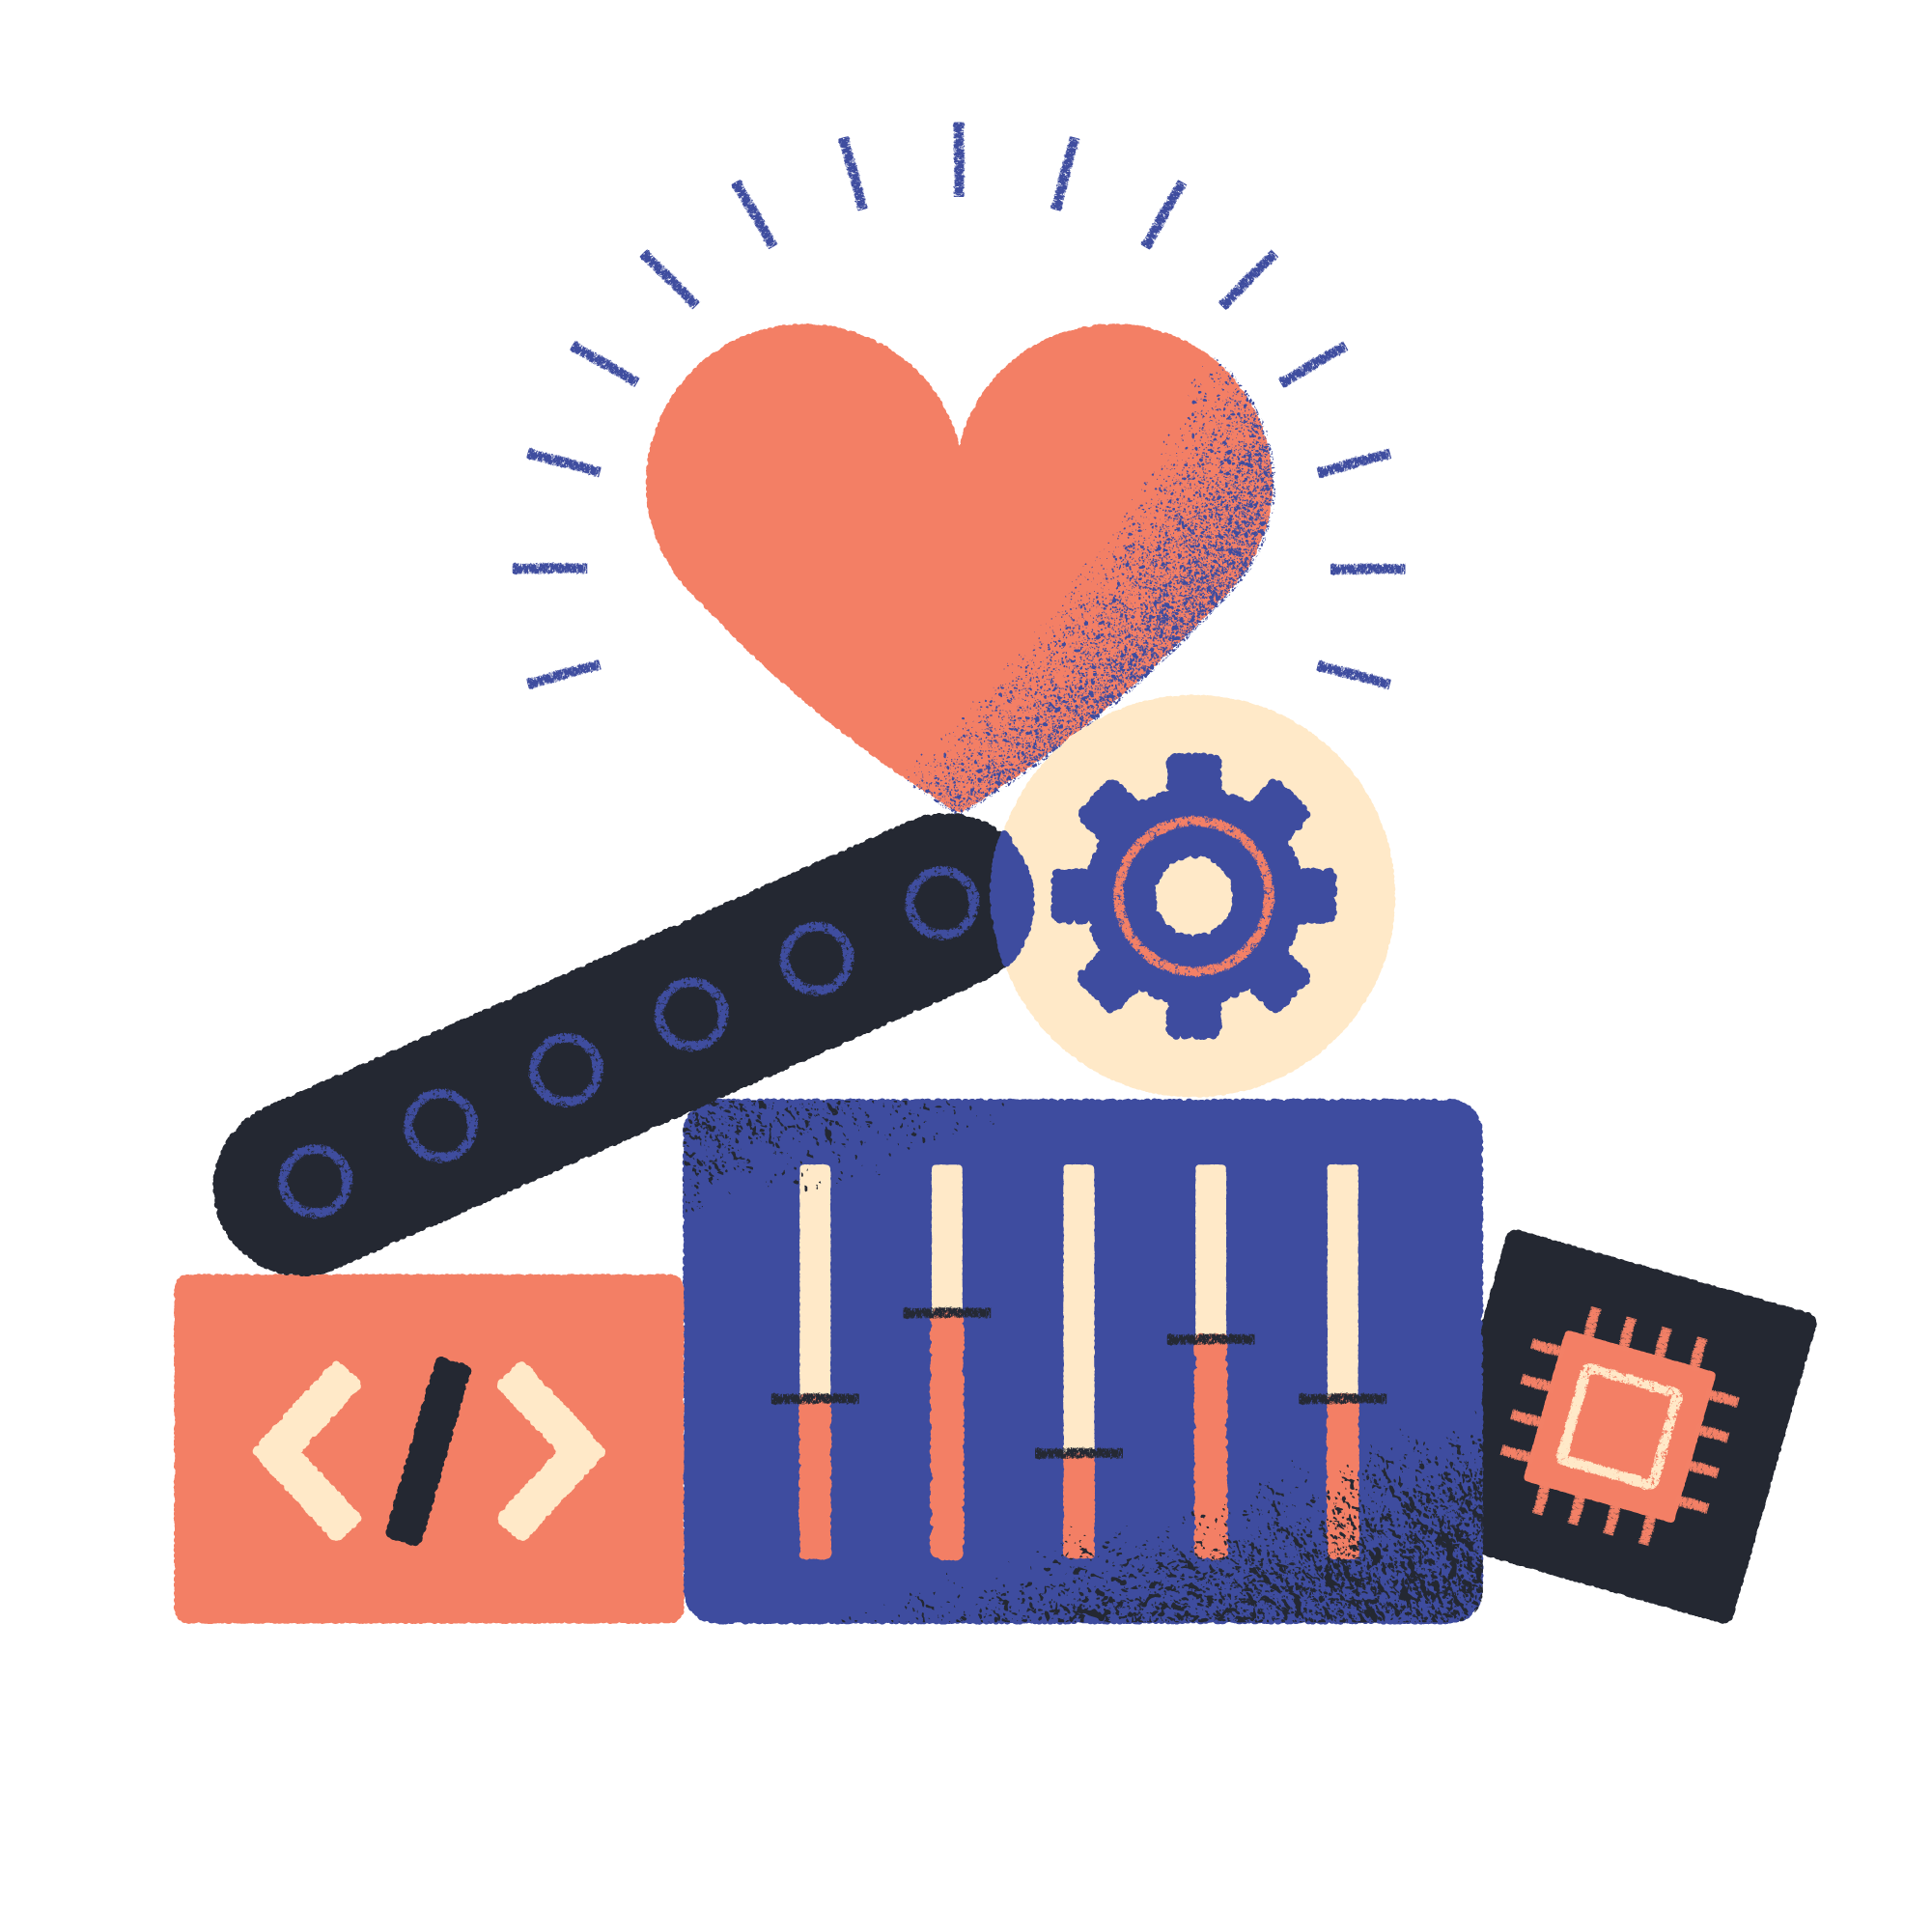 care-supported-by-technology-brand-illustration@2x.png